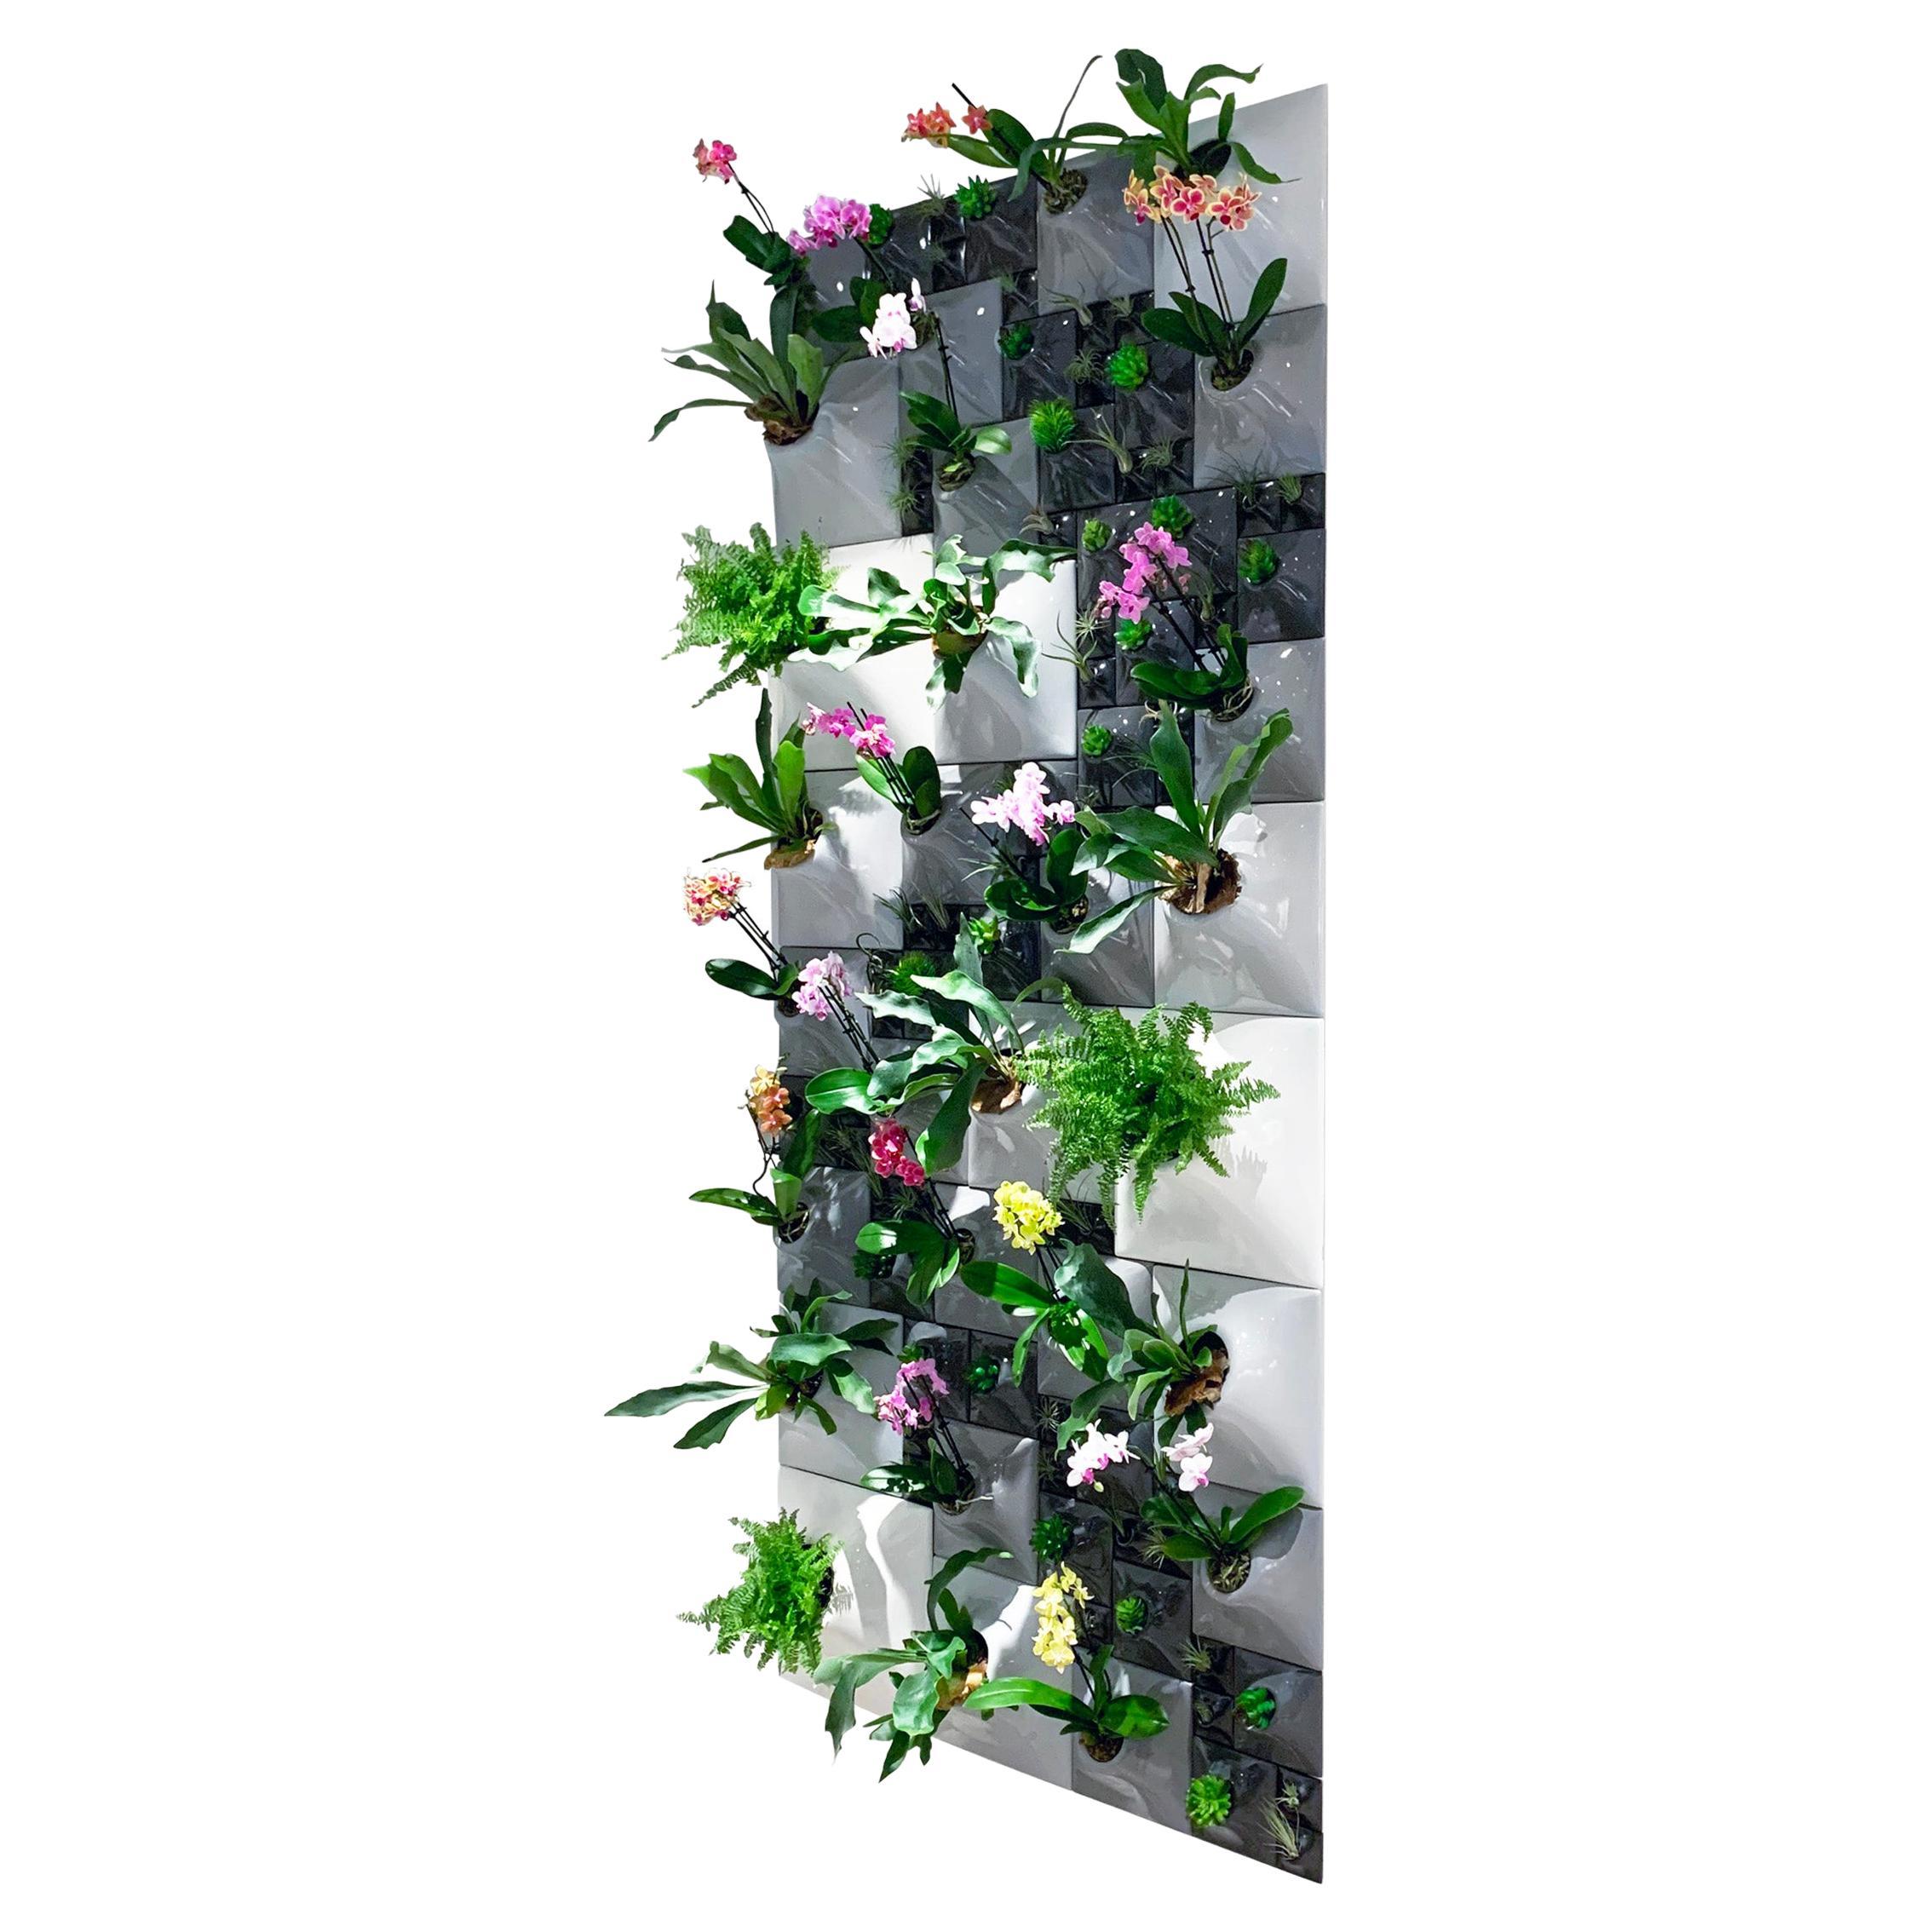 Modern Greenwall Sculpture, Plant Wall Art, Biophilic Wall Decor, Price / Sq Ft For Sale